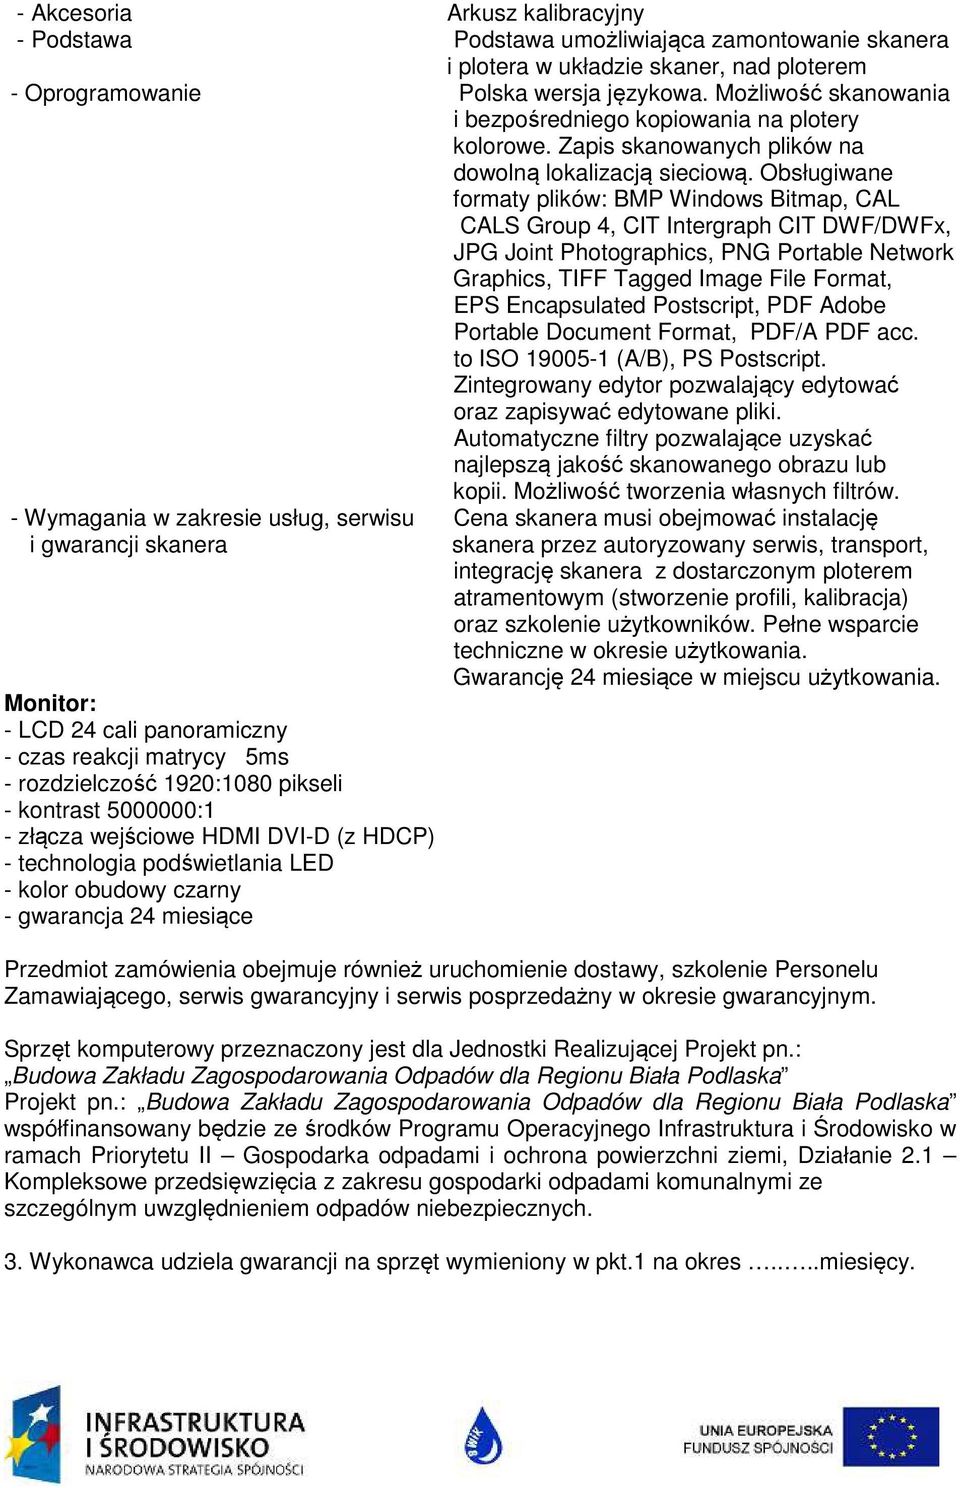 Obsługiwane formaty plików: BMP Windows Bitmap, CAL CALS Group 4, CIT Intergraph CIT DWF/DWFx, JPG Joint Photographics, PNG Portable Network Graphics, TIFF Tagged Image File Format, EPS Encapsulated